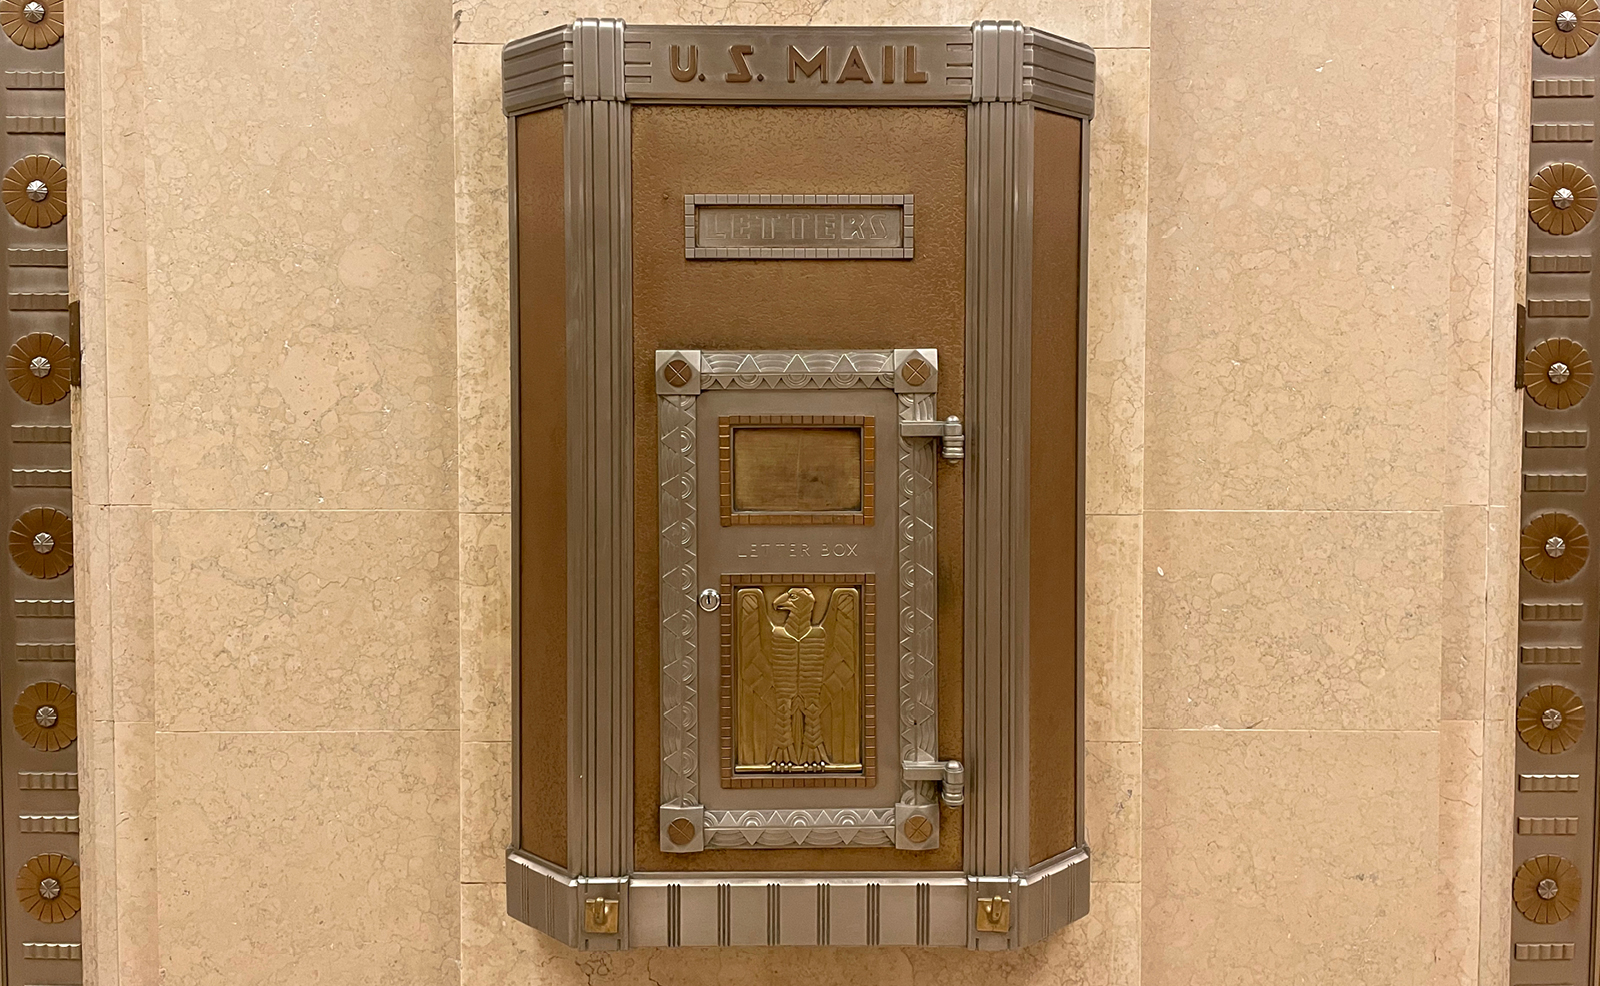 Image of an ornate, bronze mailbox